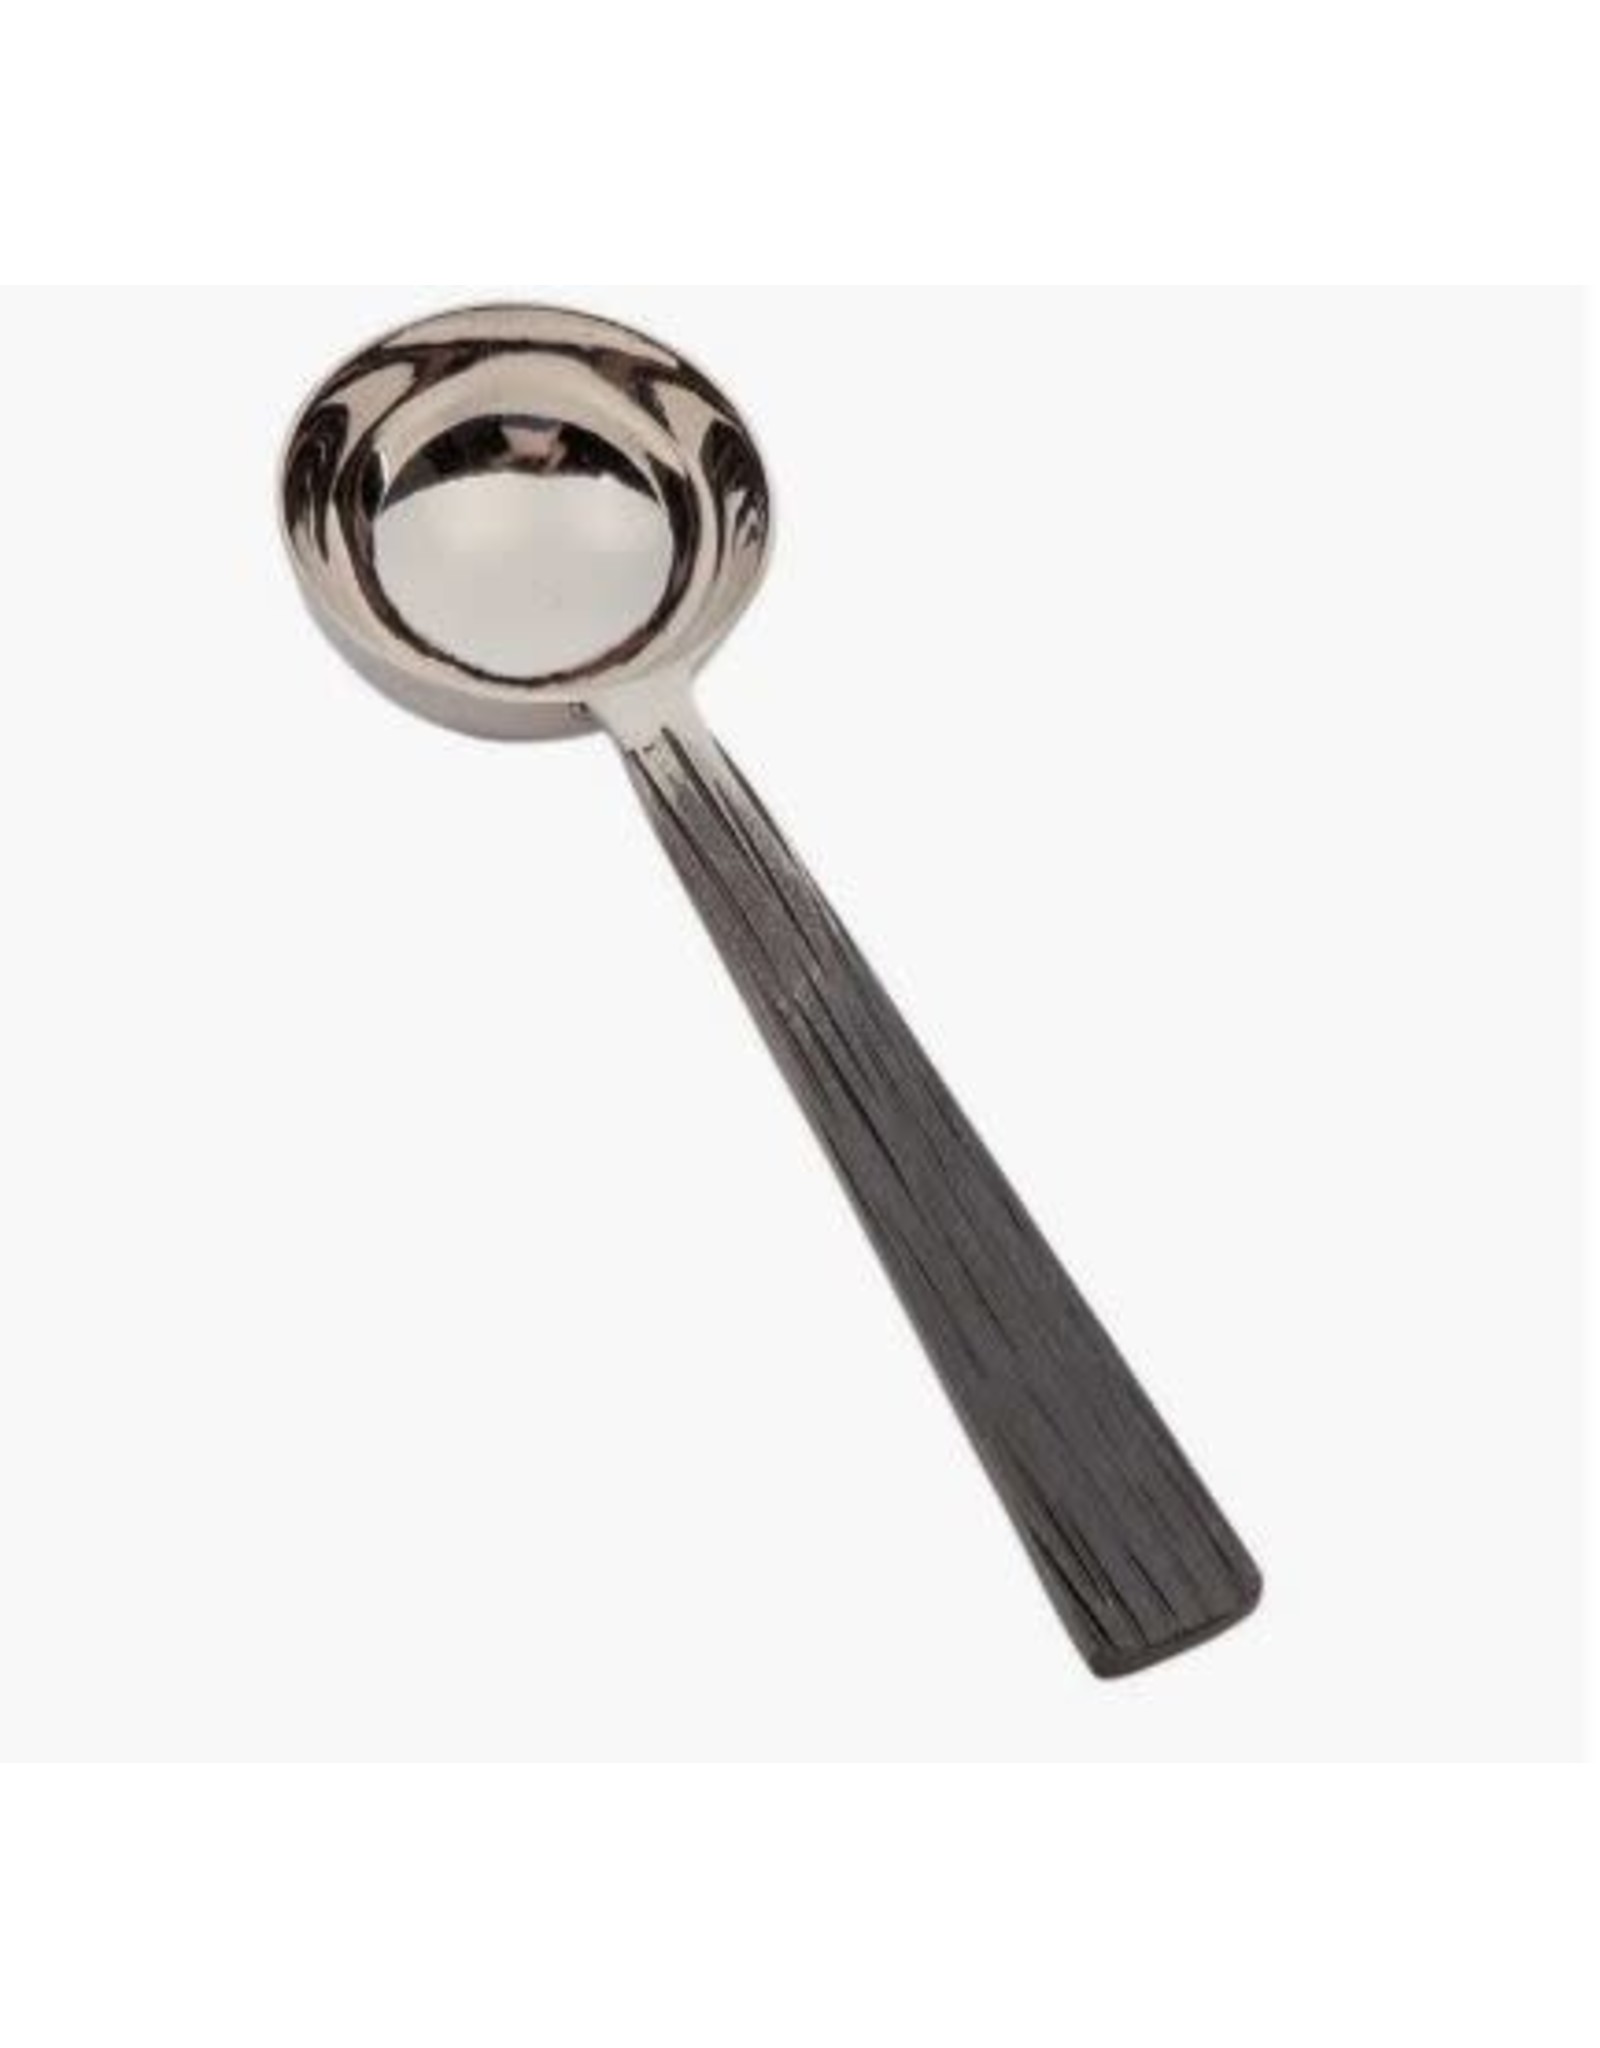 India Hand-Forged Coffee Scoop, India